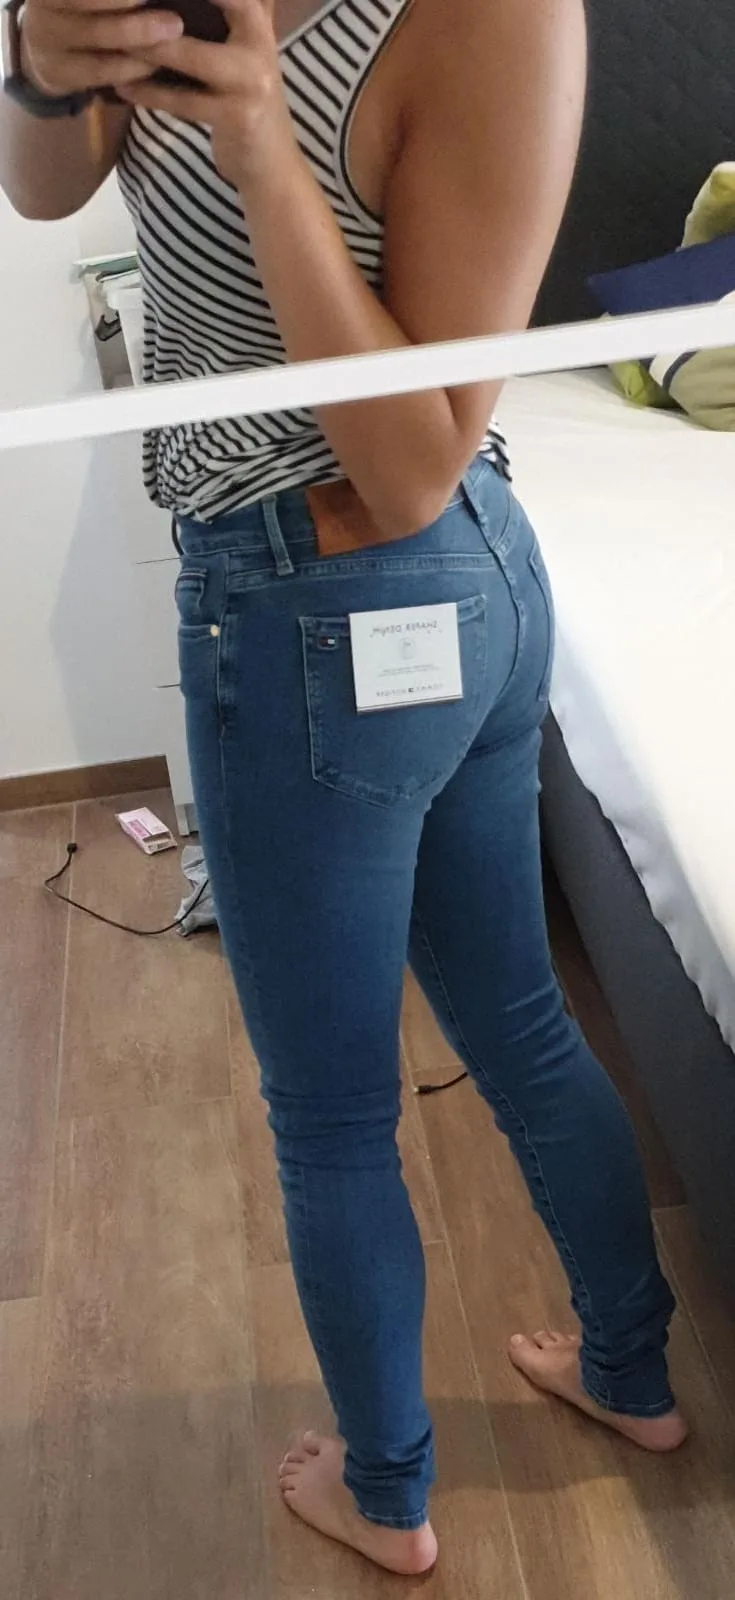 A sexy high quality photo of a girl making a selfie of her ass in tight jeans.